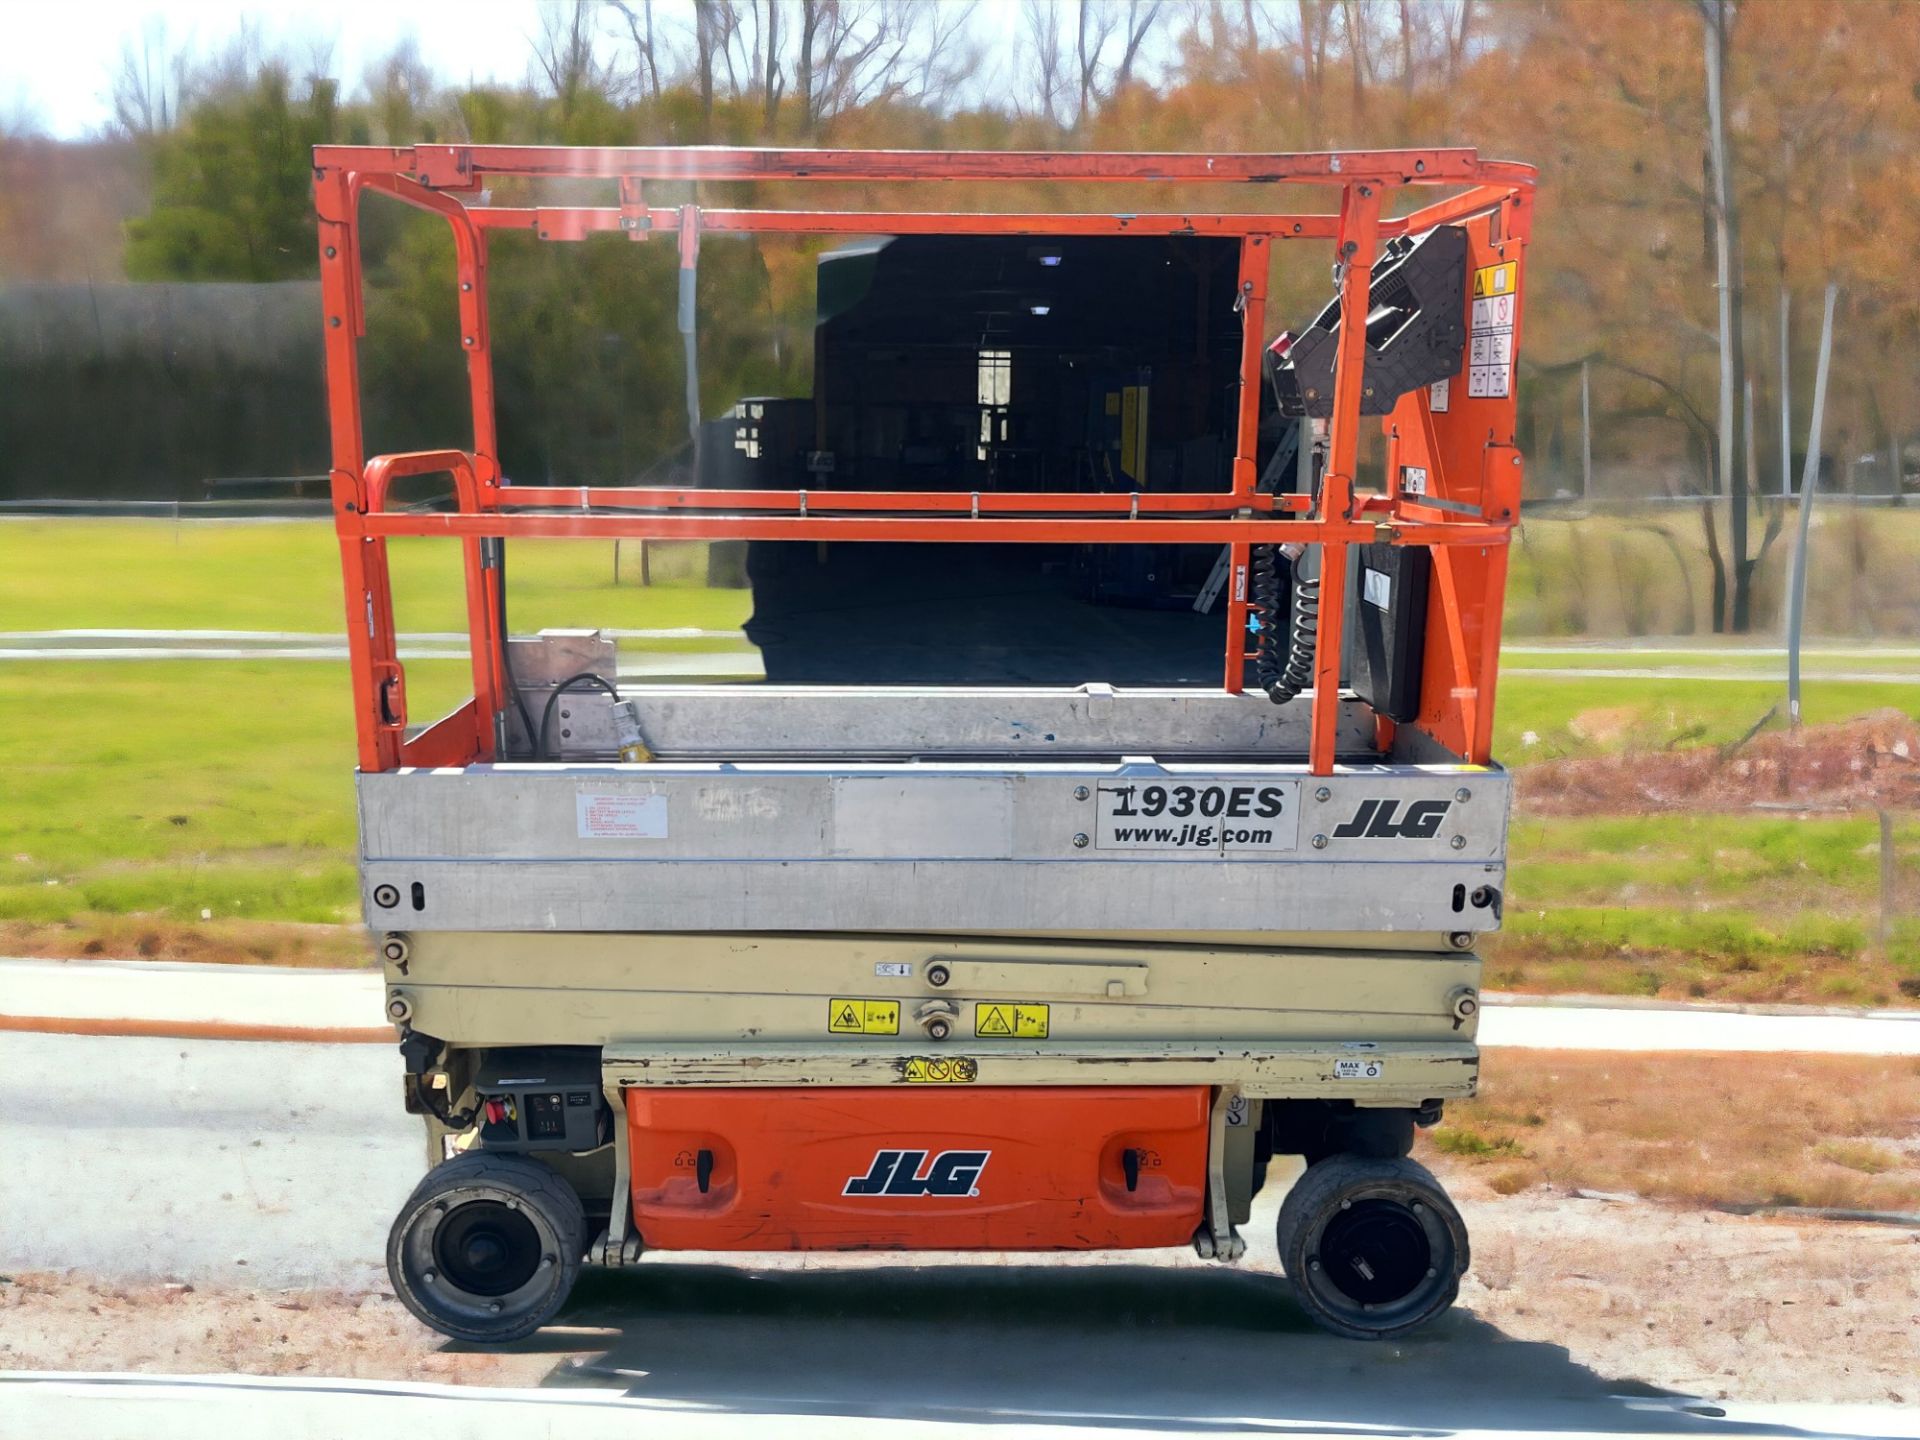 JLG 1930 ES ELECTRIC SCISSOR LIFT - 2011 **(INCLUDES CHARGER)** - Image 4 of 4